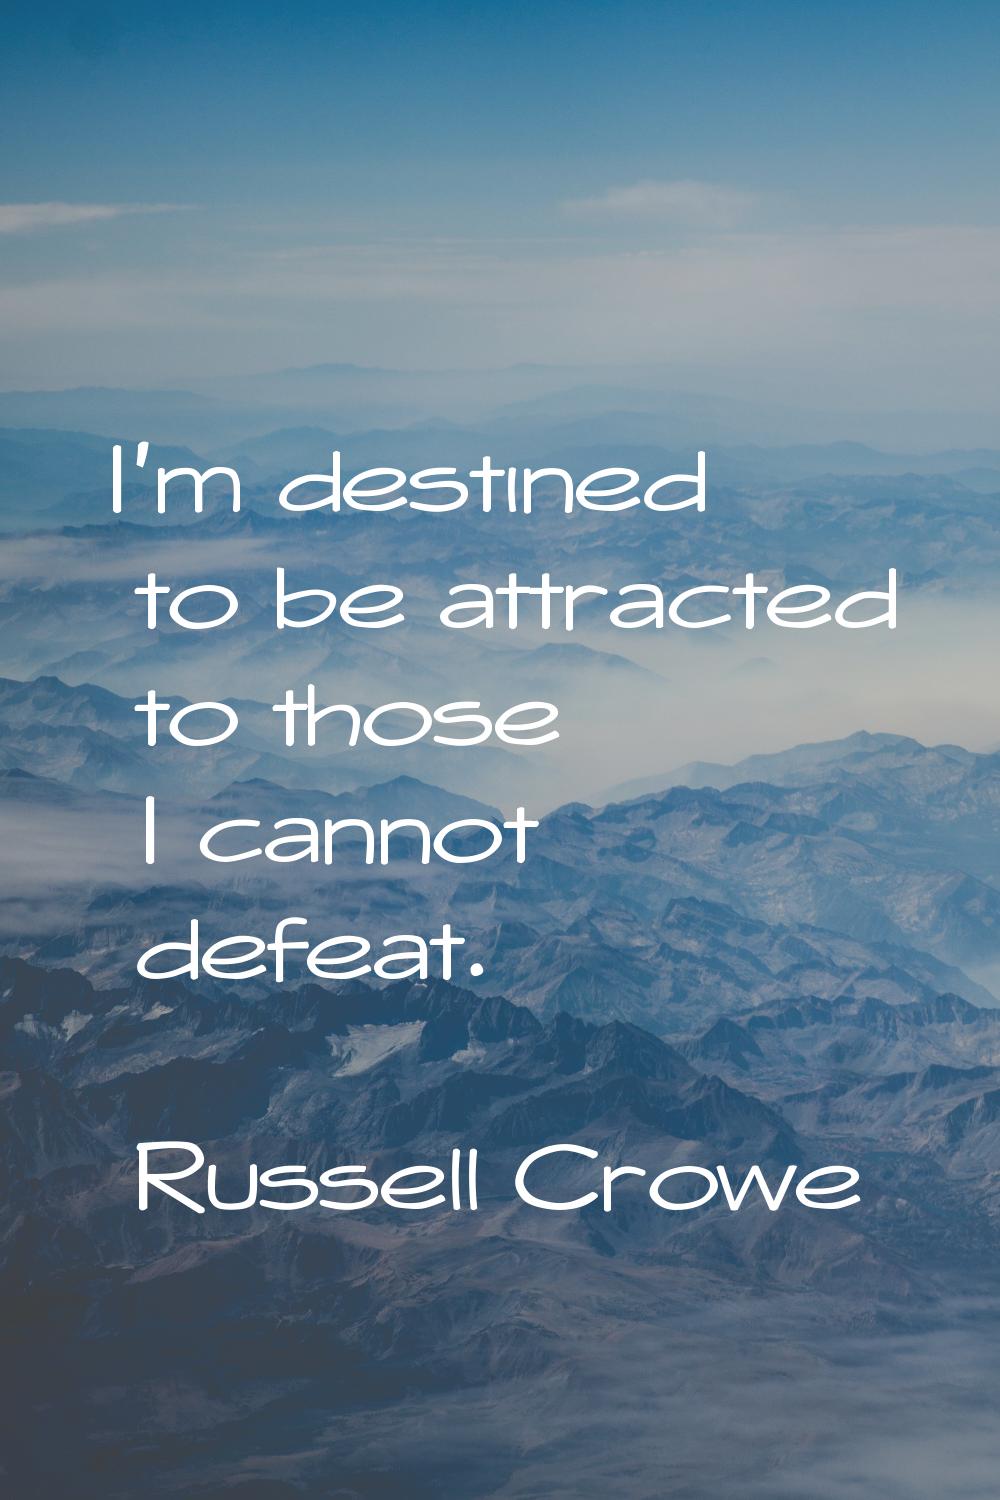 I'm destined to be attracted to those I cannot defeat.